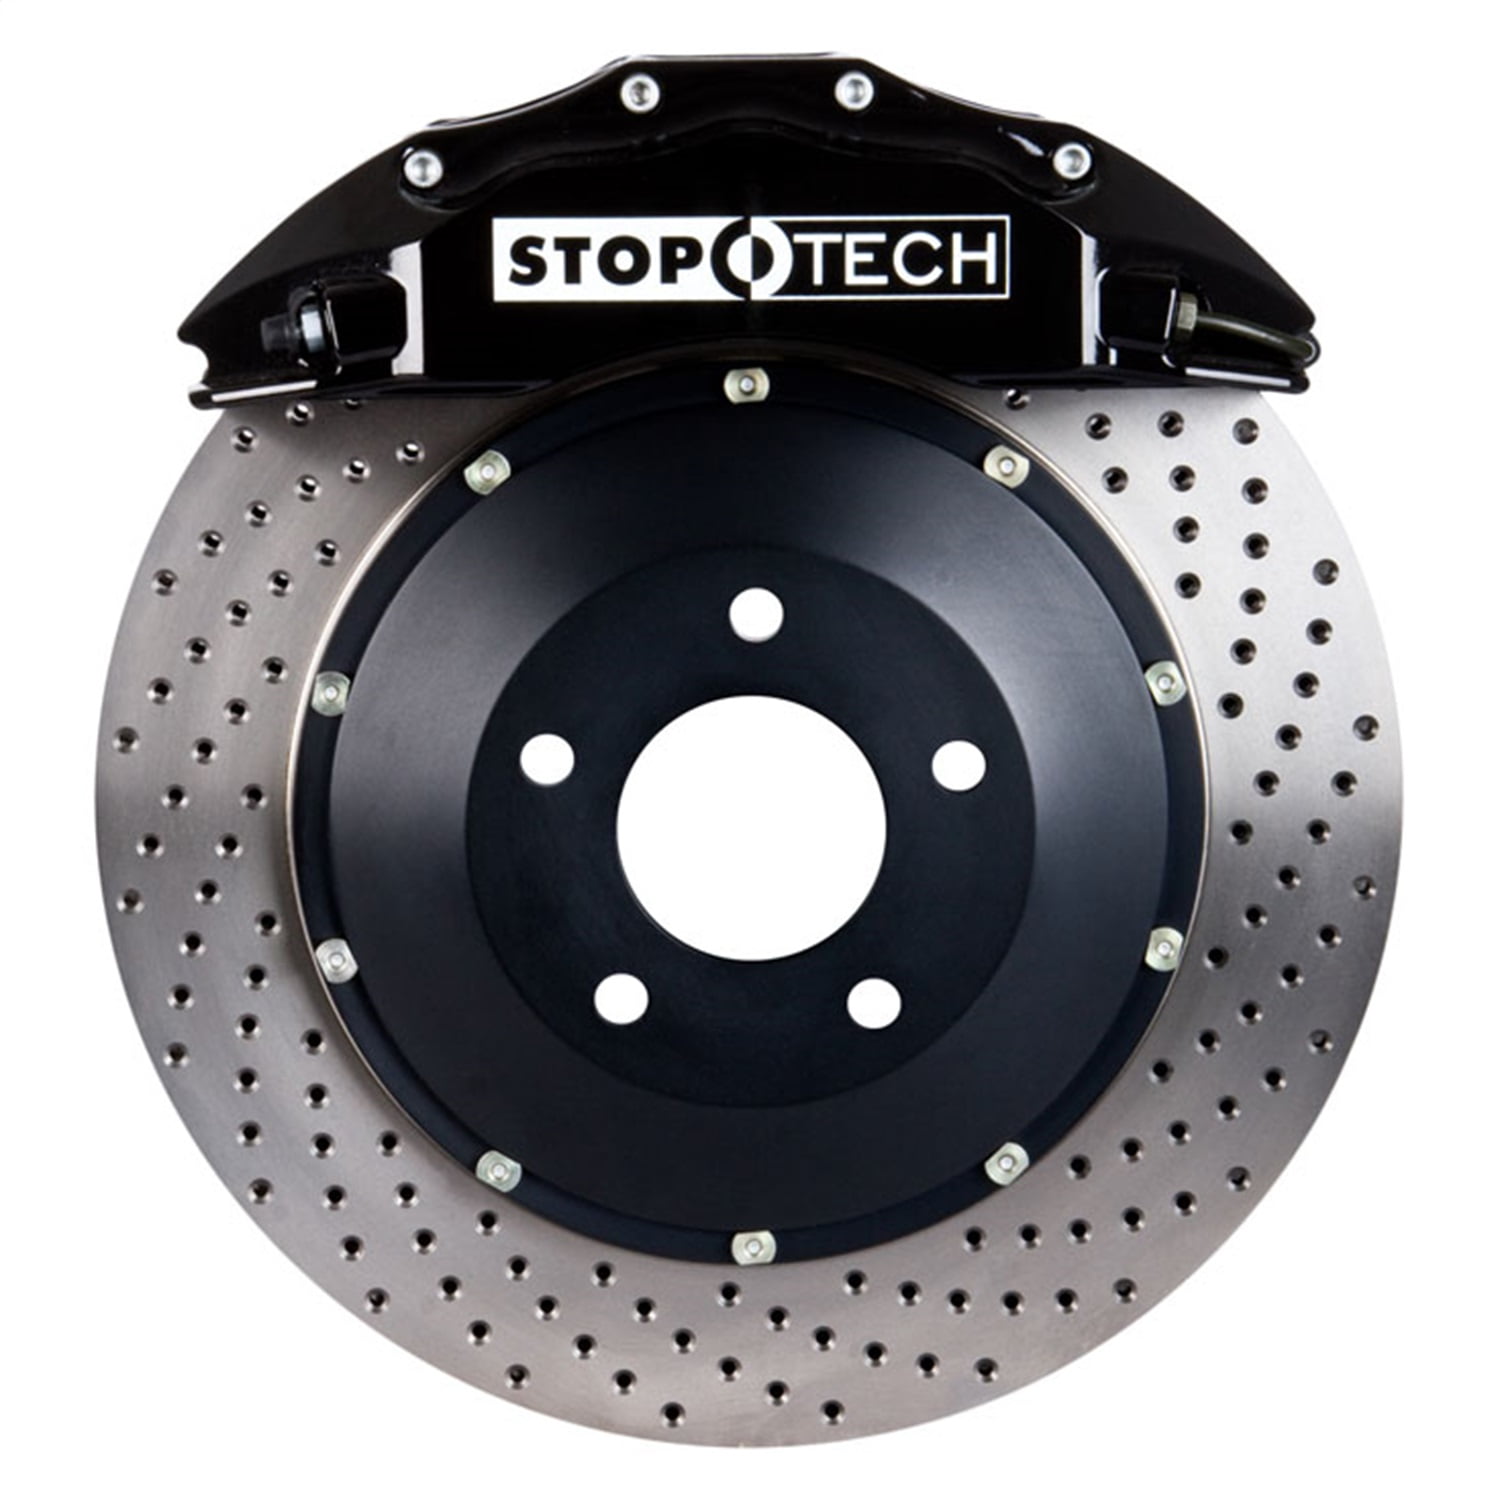 Eos StopTech Disc Brake Pad and Rotor Kit Front-Rear for A3 Beetle Jetta